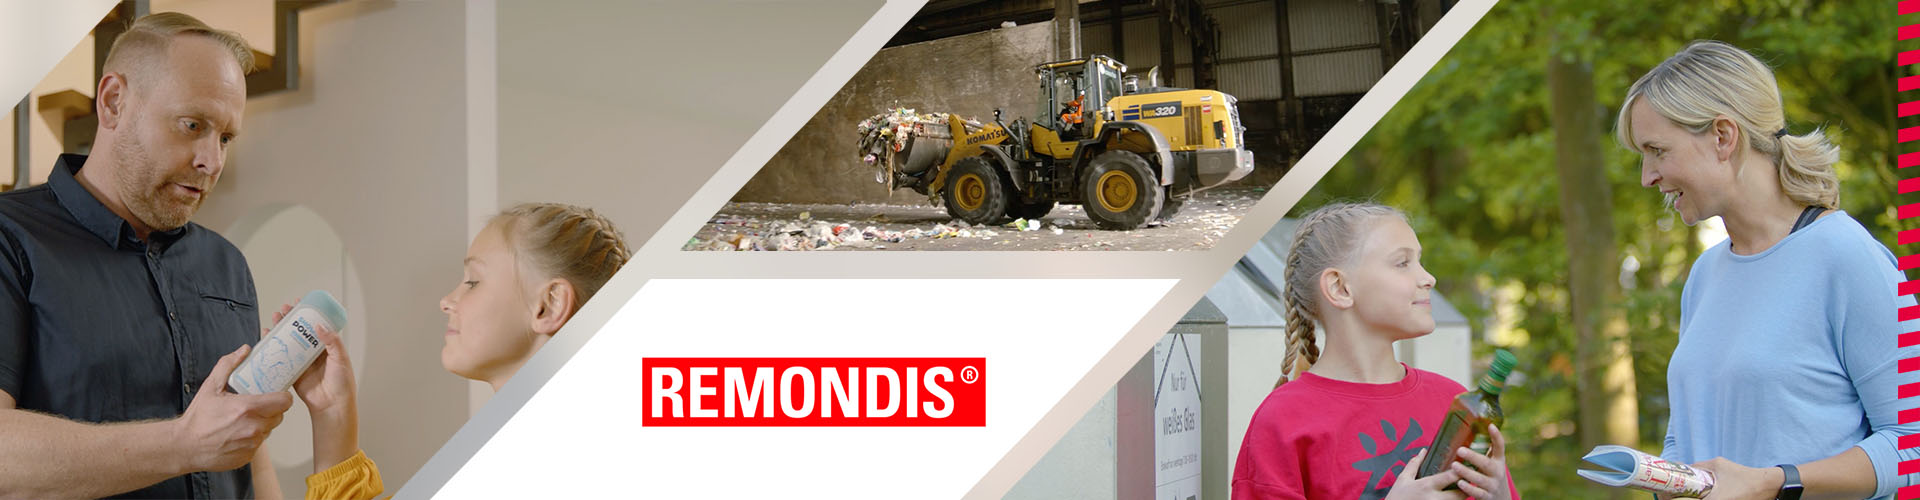 Remondis Recycling